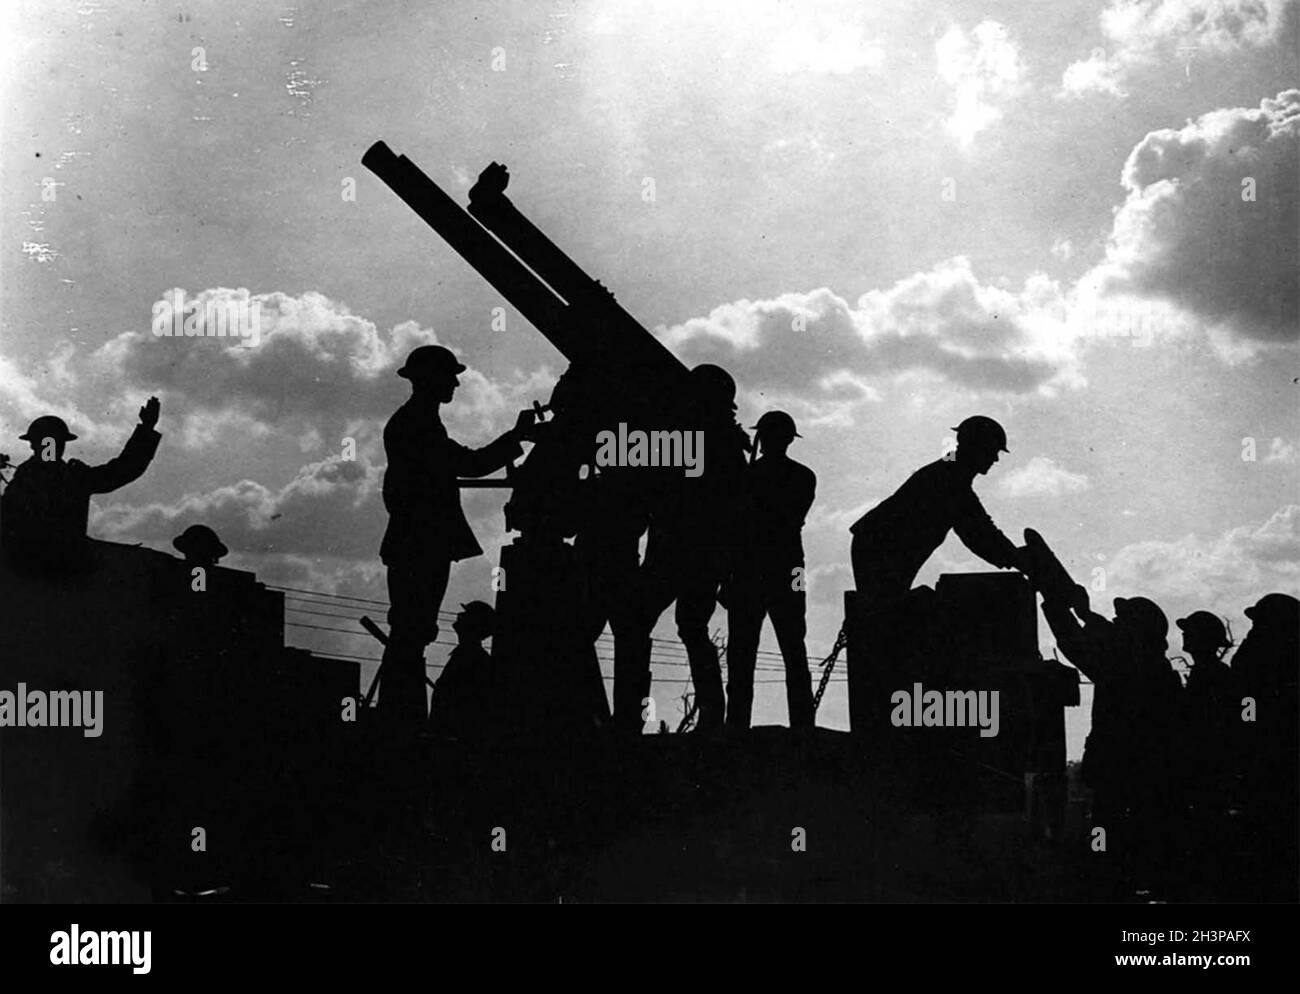 Soldiers silhouetted against the sky prepare to fire an anti-aircraft gun during the Battle of Broodseinde during the  Passchendaele campaign. Stock Photo